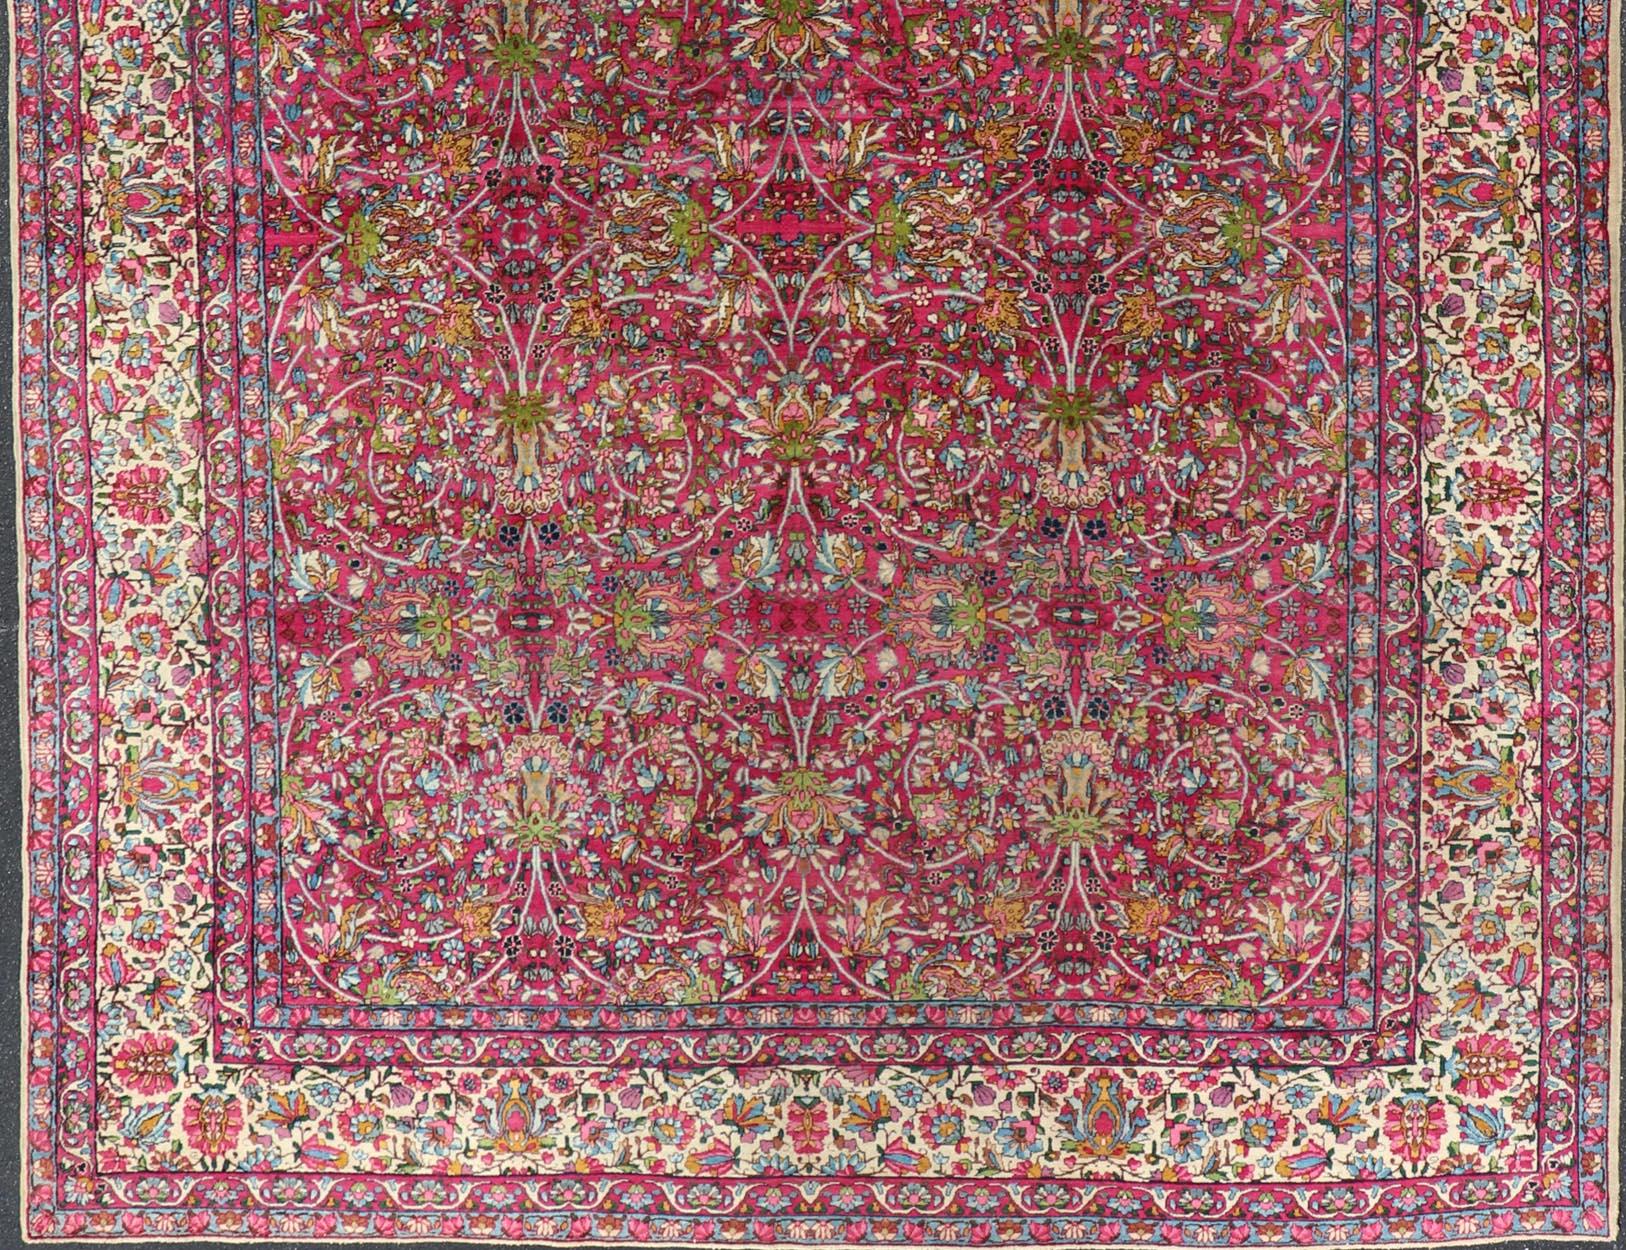  Antique Persian Lavar Kerman Rug with All-Over Floral Design In Jewel Tones  For Sale 2